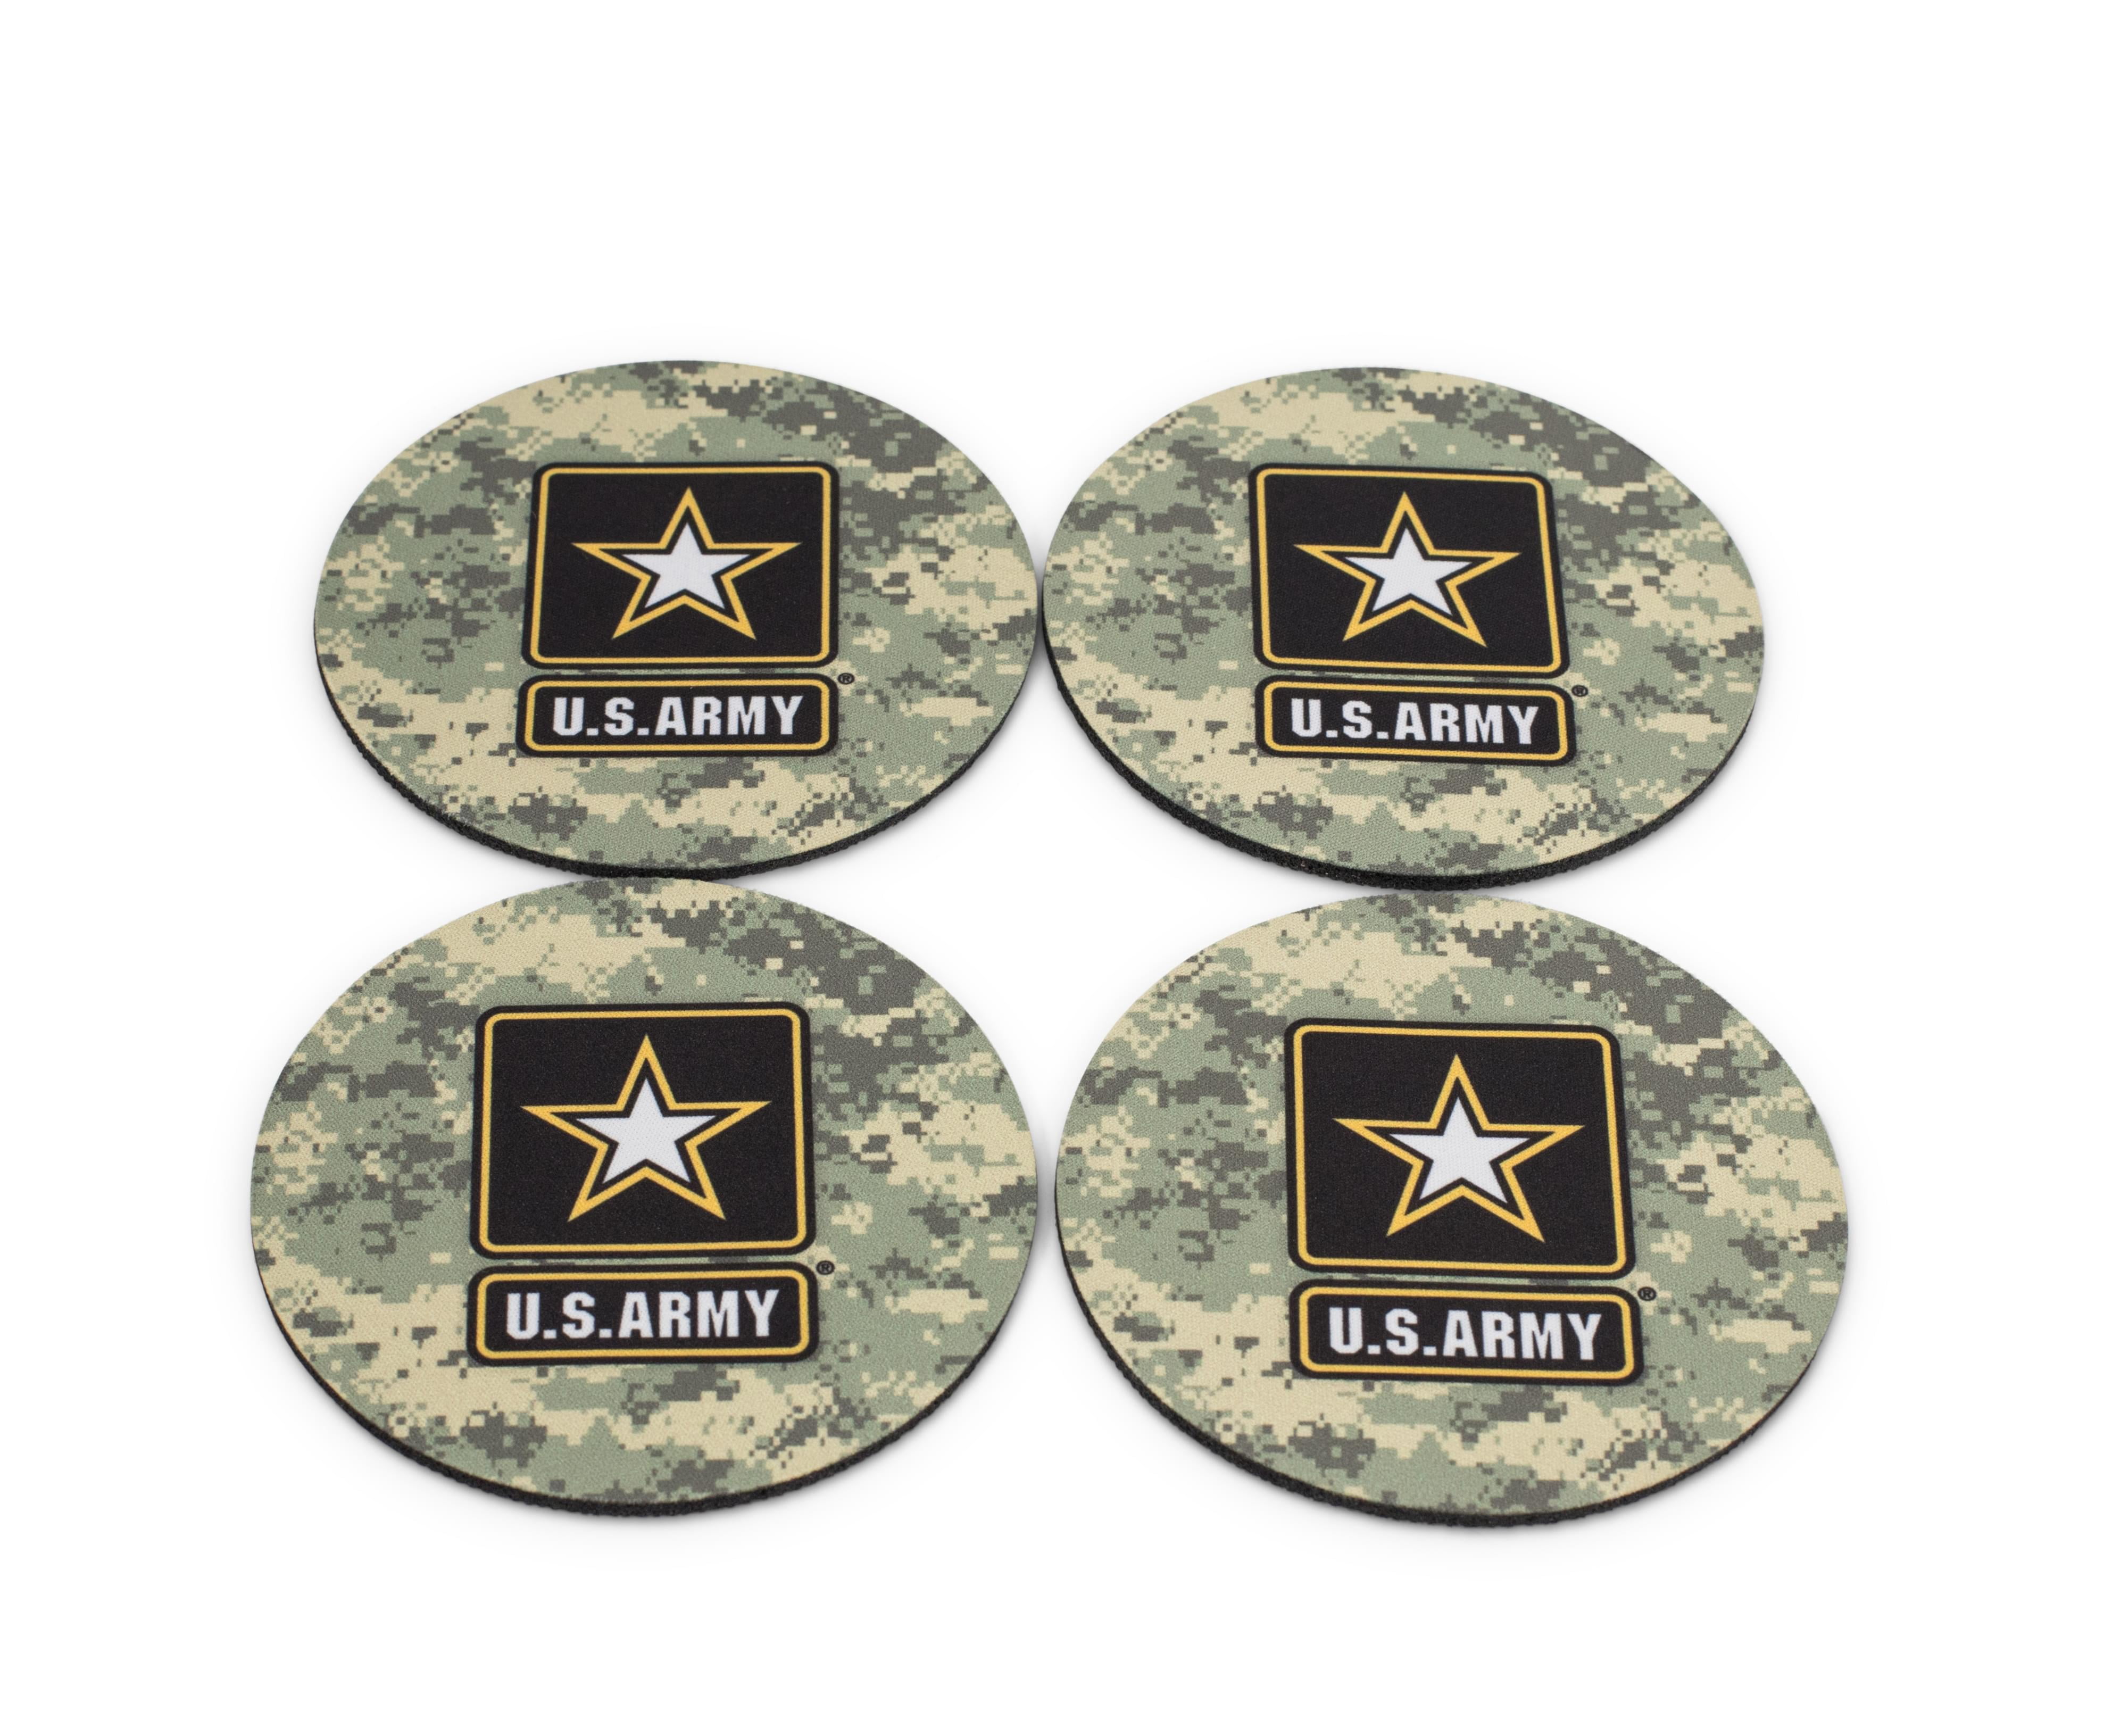 Made To Order custom food safe silicone candy molds –2 Air Force/Army Lieutenant Colonel Insignia